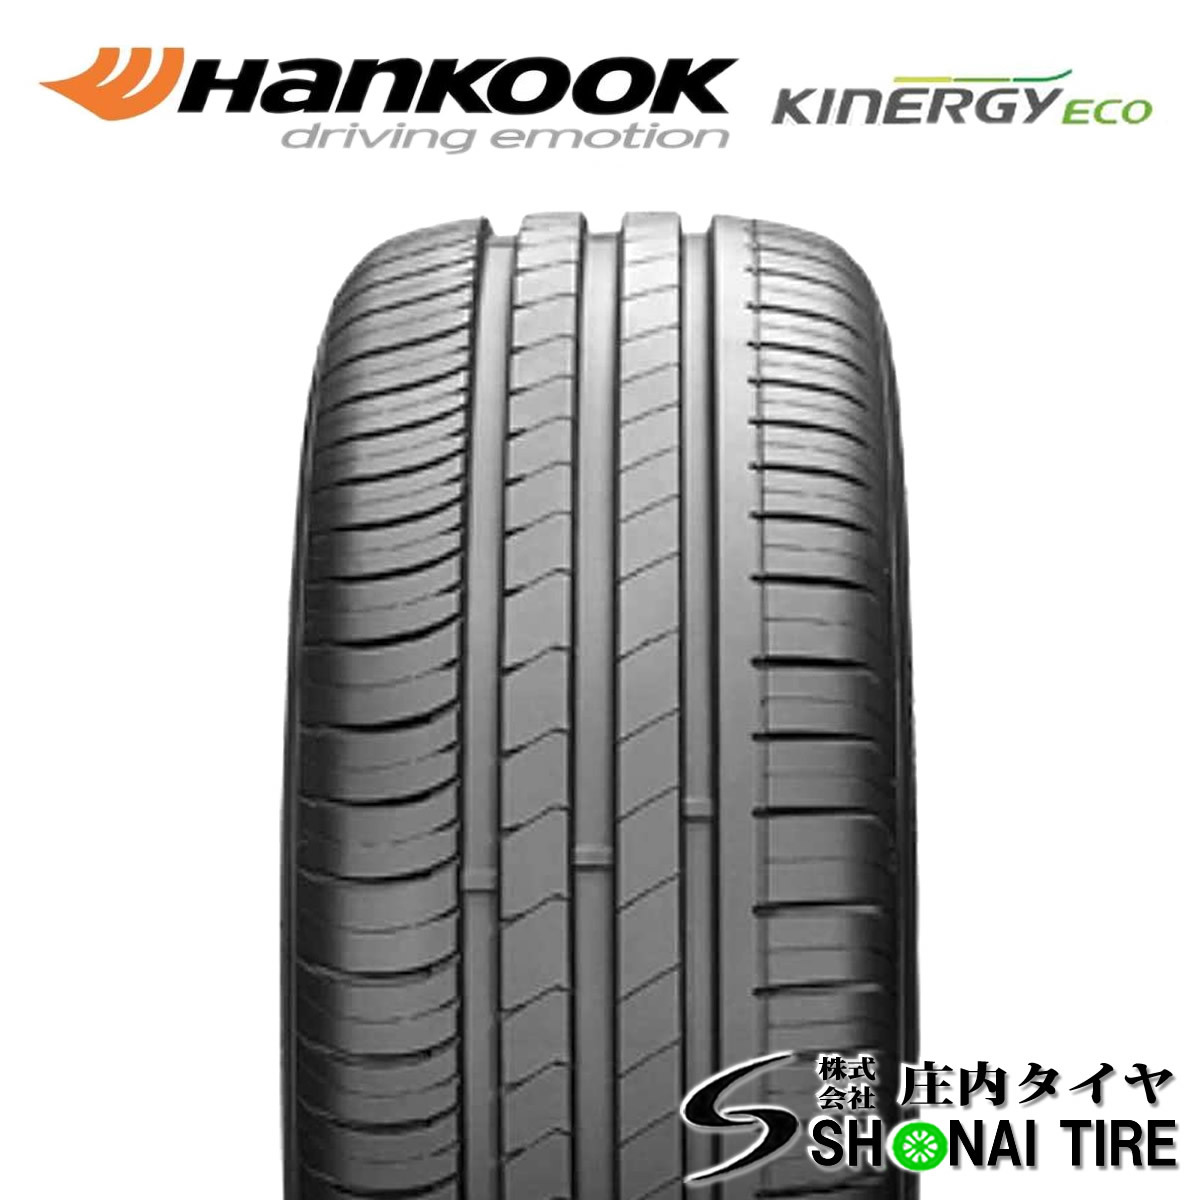  stock necessary verification company addressed to free shipping Hankook KINERGY ECO K425 175/65R15 84H summer 2 ps price new car installation goods BMW/MINI (F55/56 F57) approval NO,HK214-2